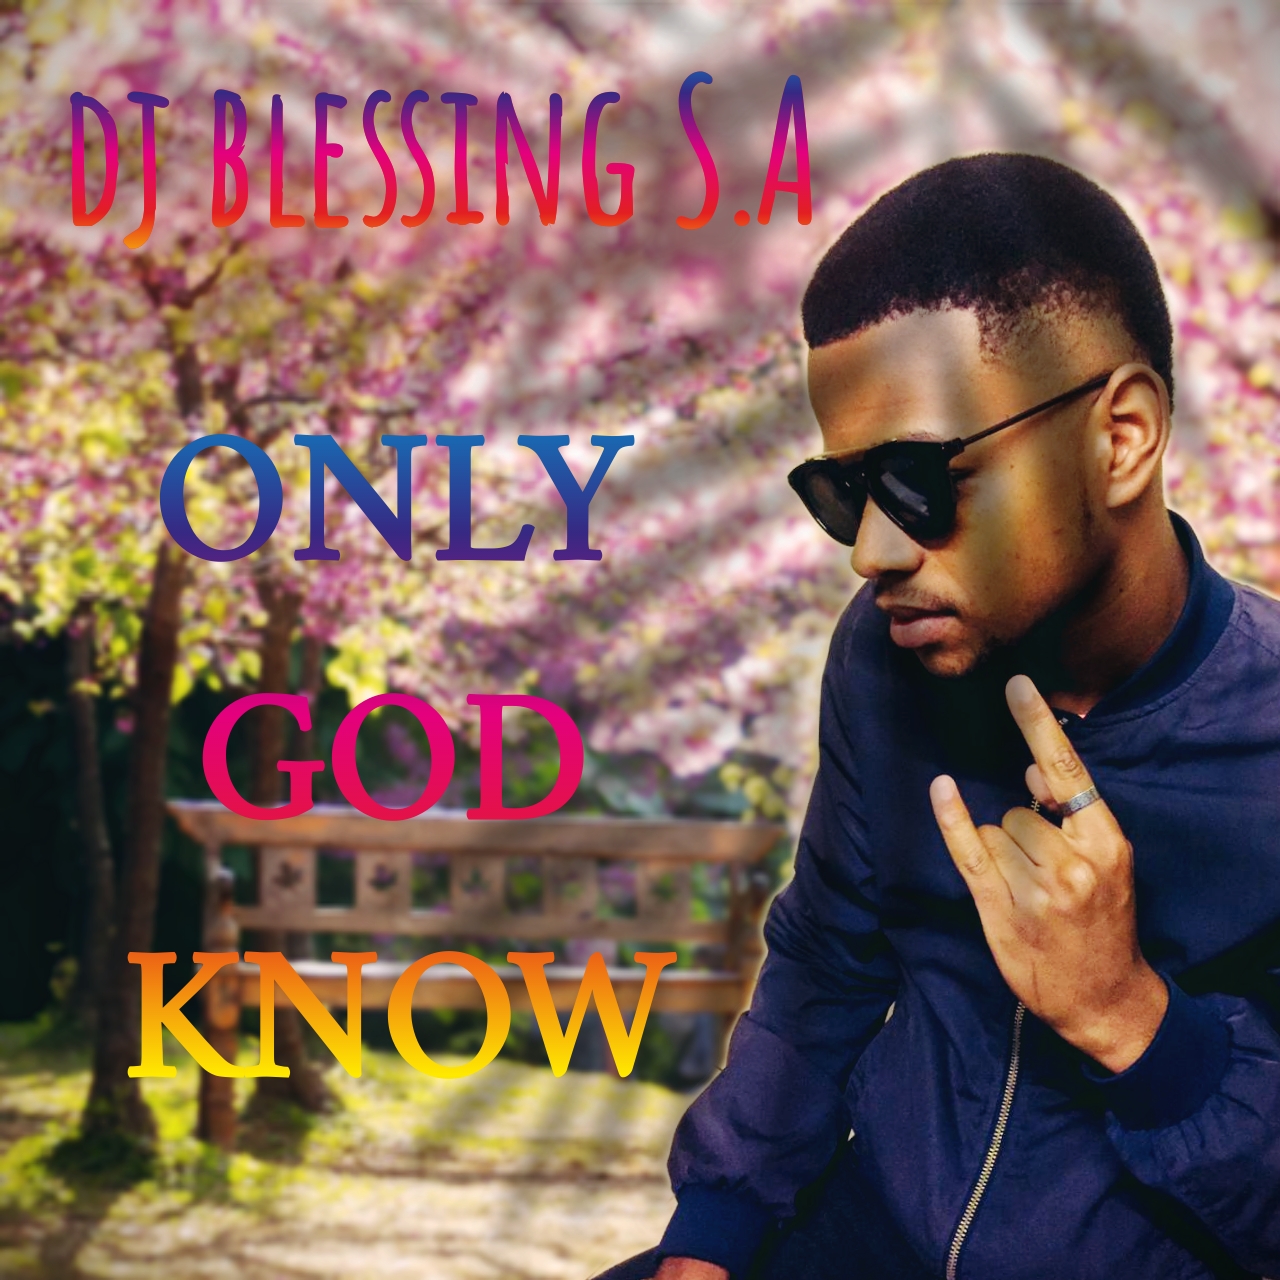 Only god know - Dj blessing s.a